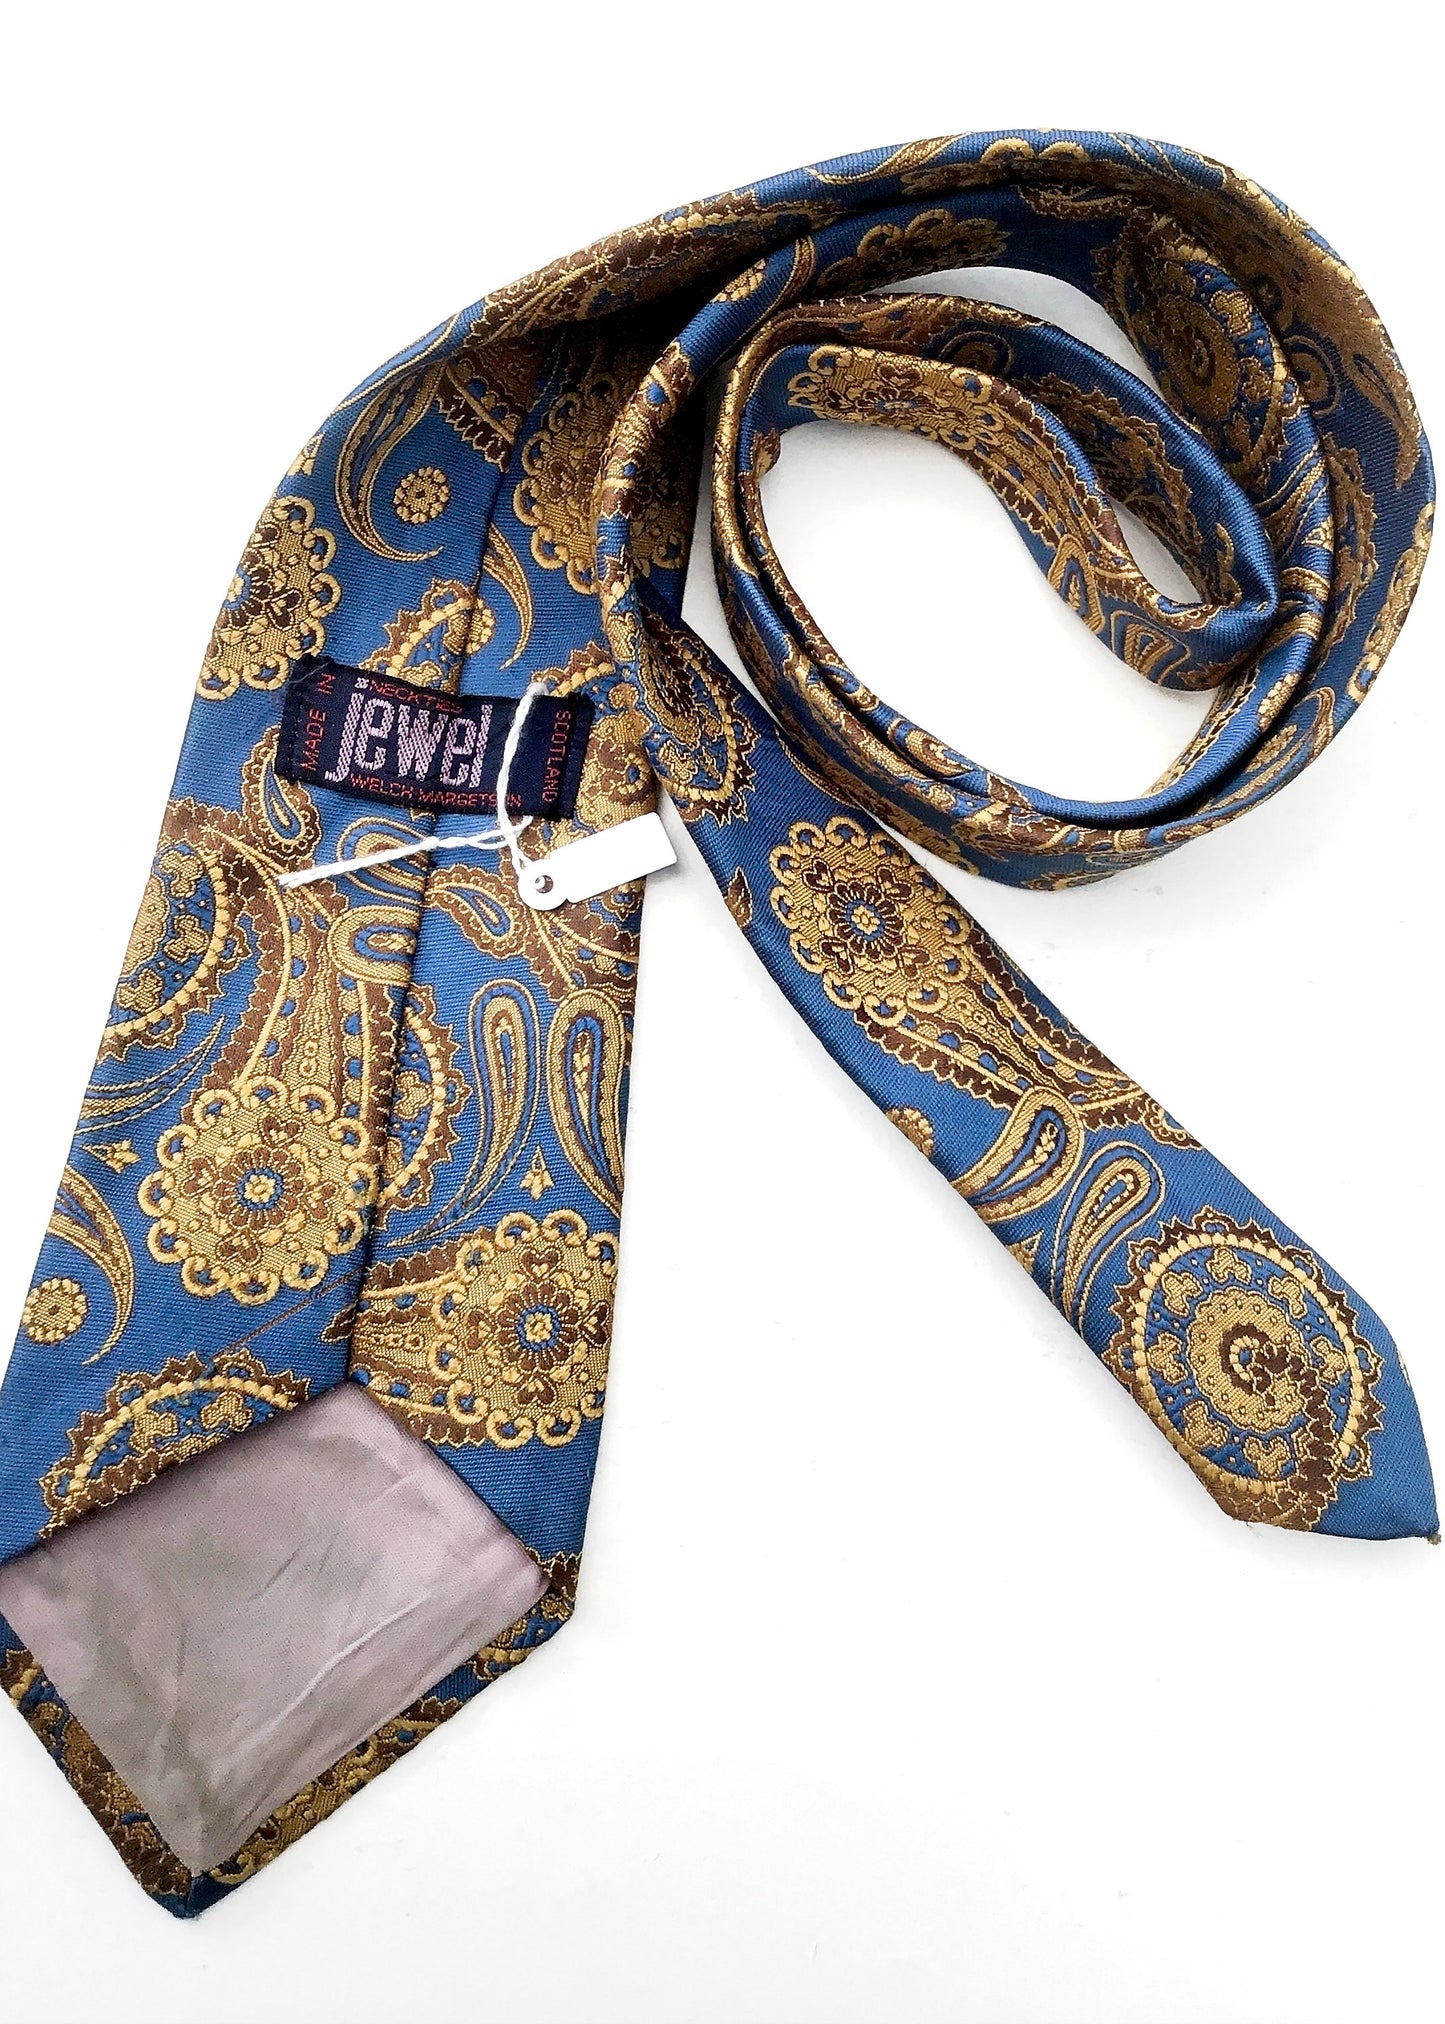 Vintage Blue and Gold Pattern Tie by Welch Margetson for Jewel